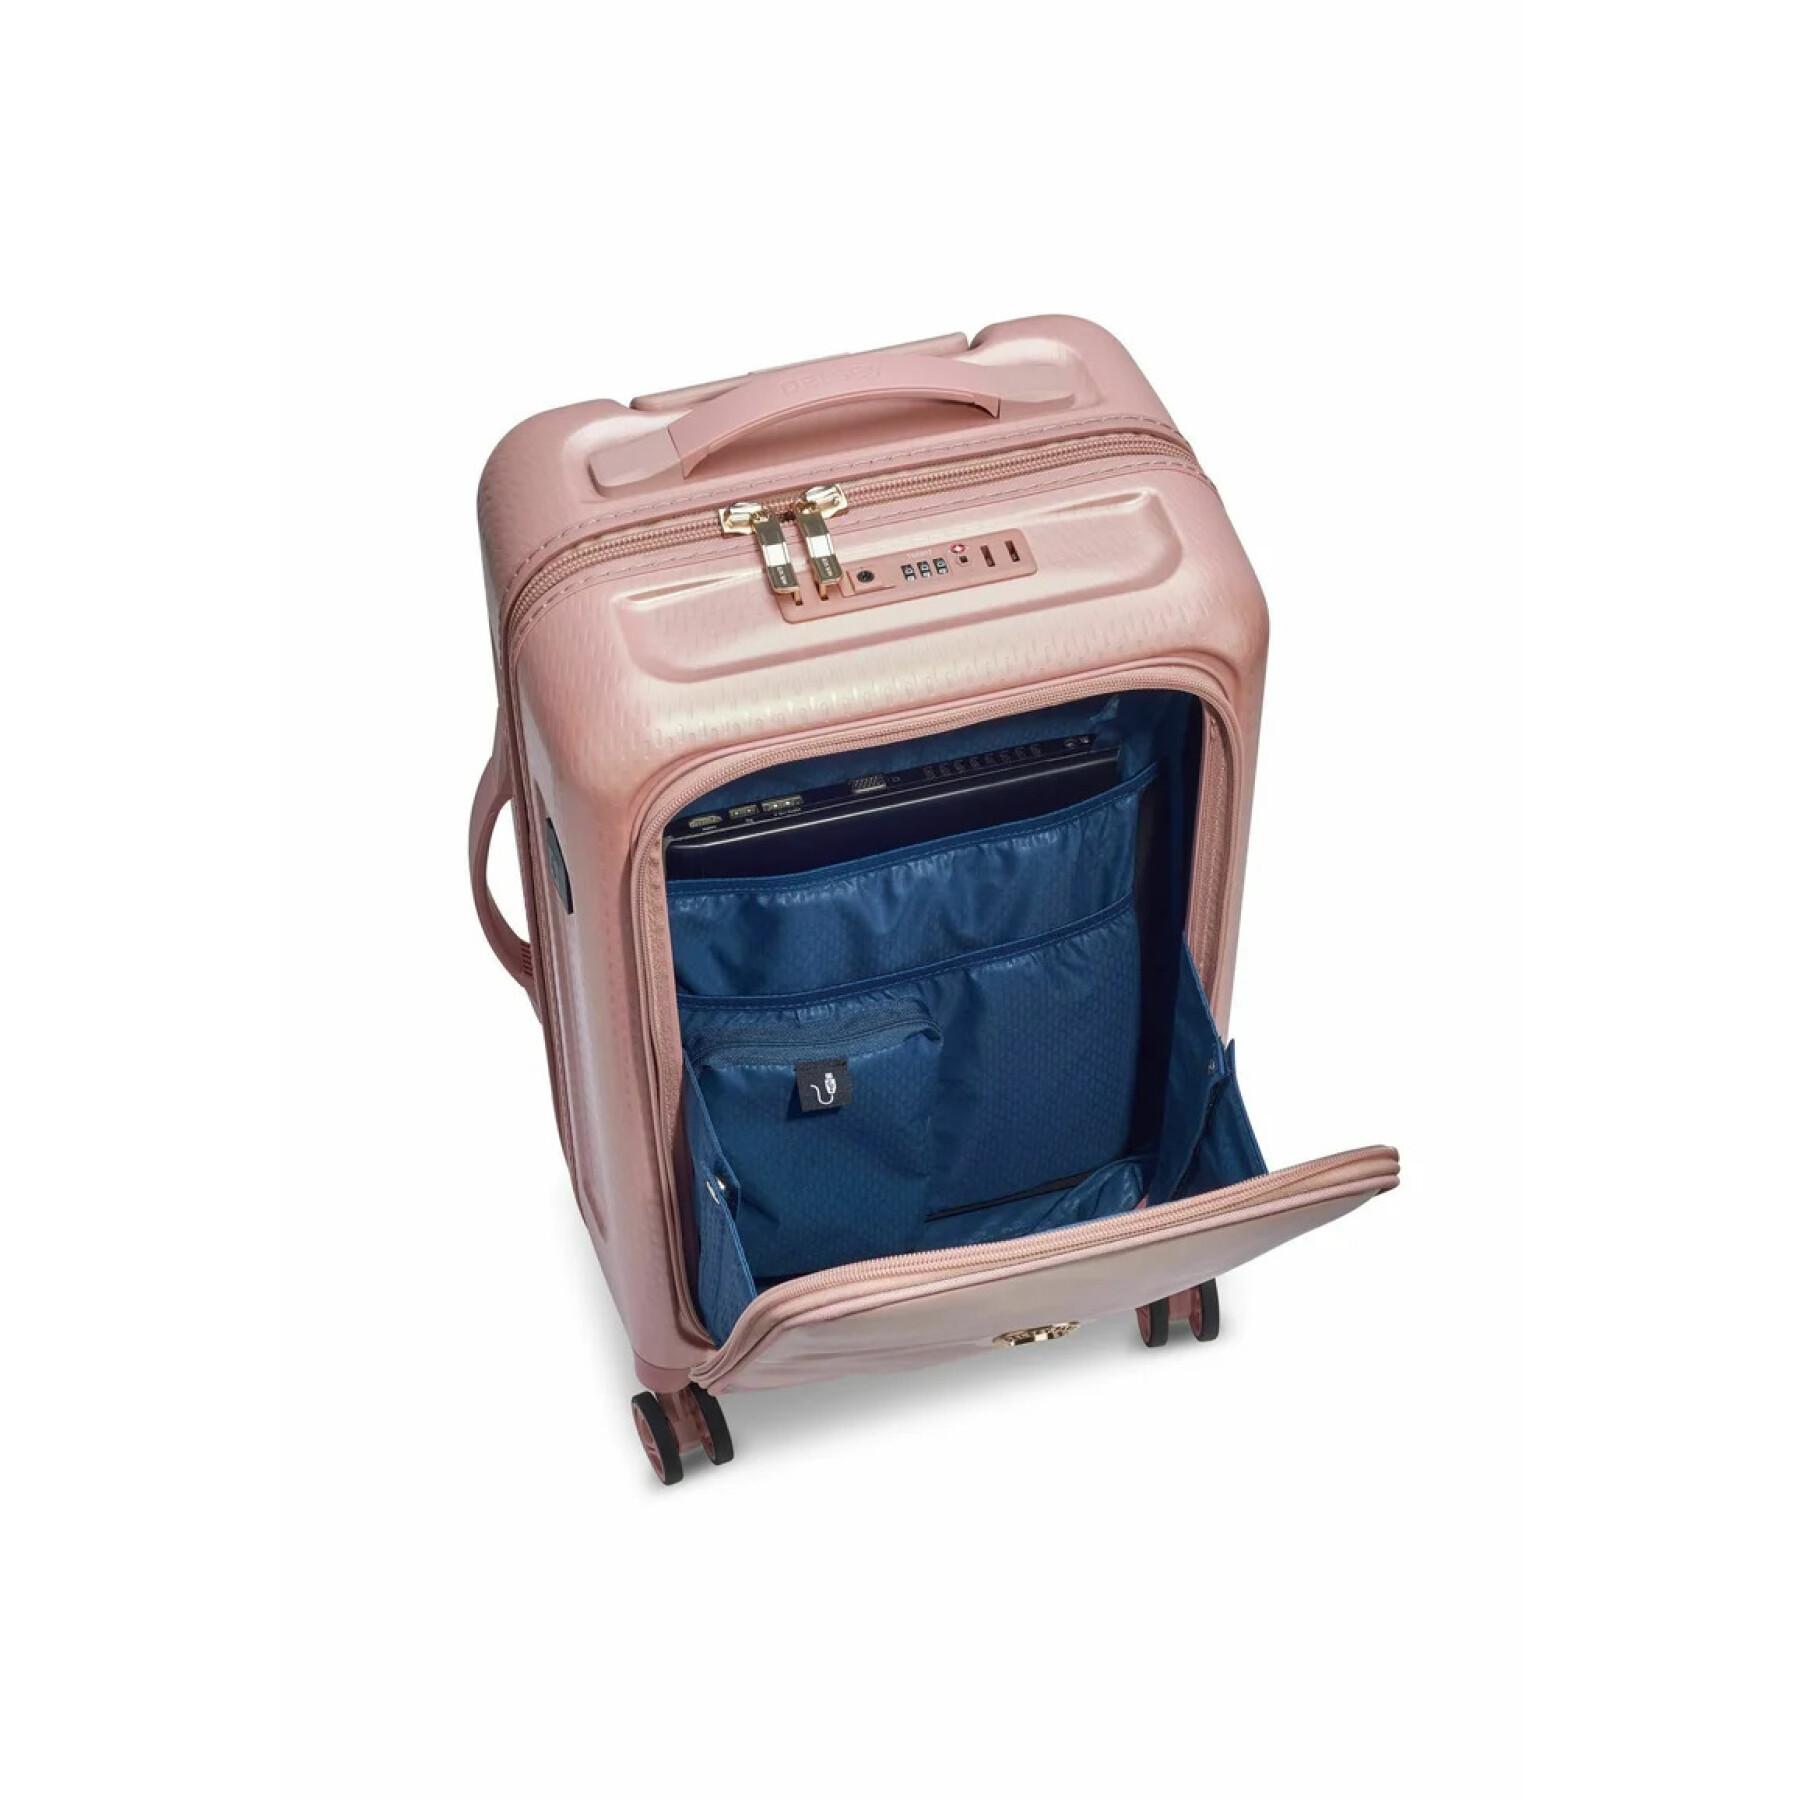 Carry-on suitcase Delsey Business Turenne